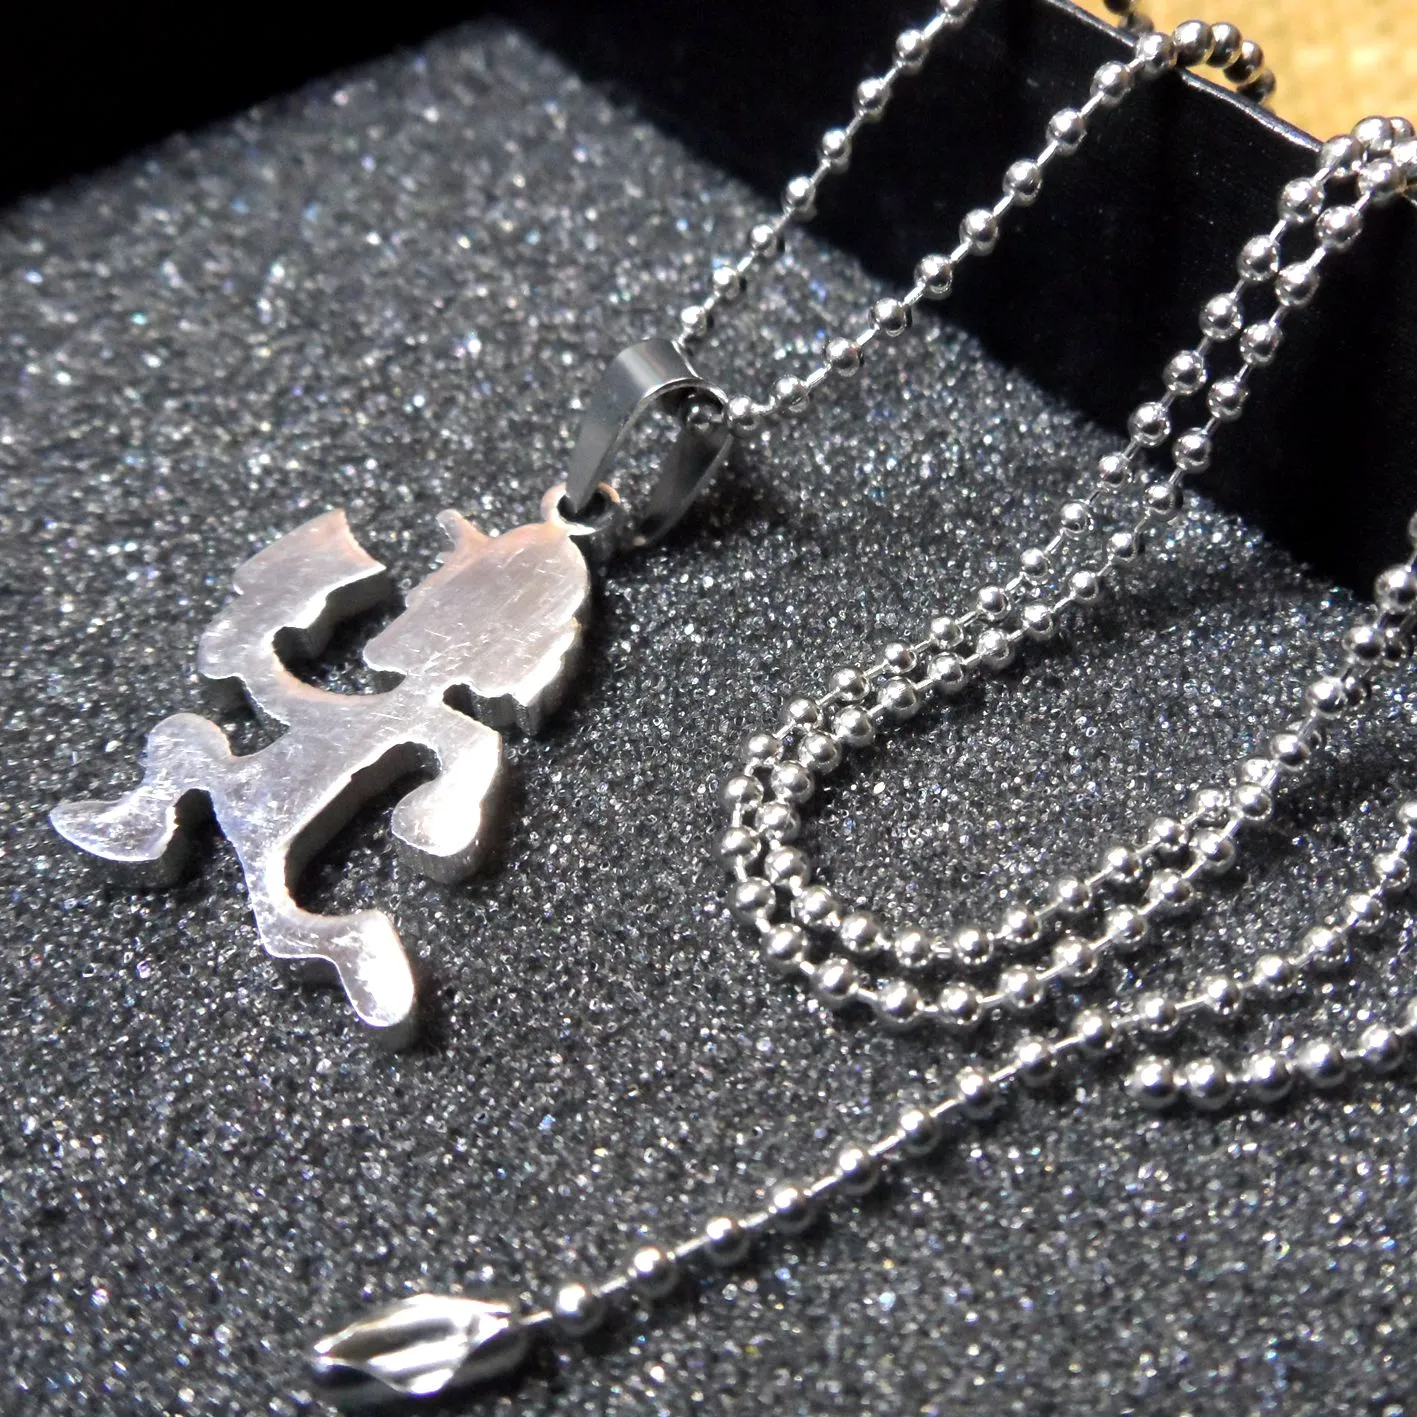 Stainless Steel ICP Bang Pow Boom Charm Pendant Necklace Insane Posse  Polished Jewelry 4Mm 24 Inch Nk Chain | Amazon.com